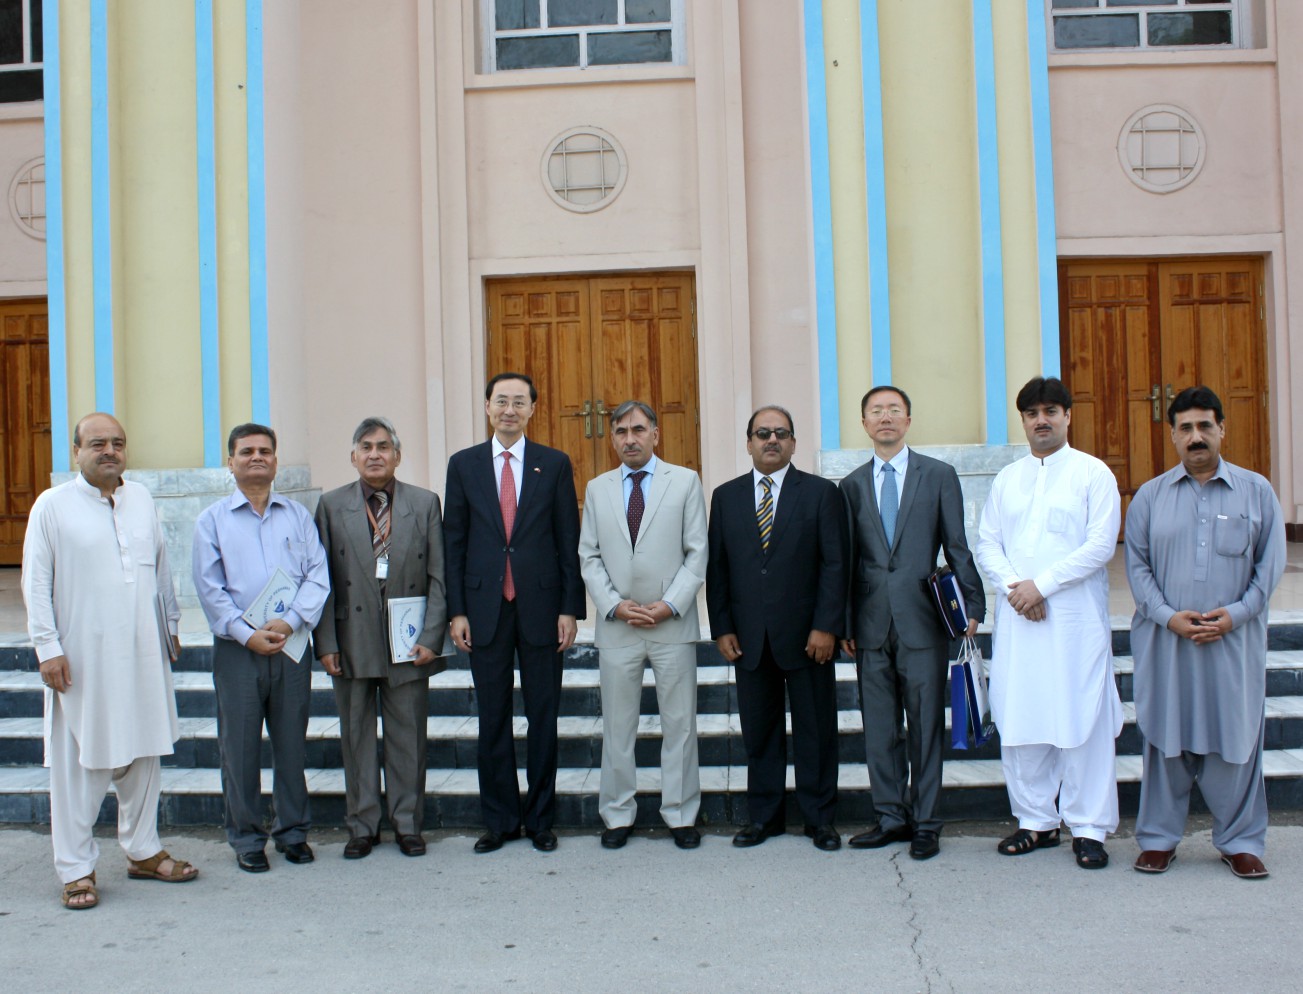 His Excelency Sun Weidong  in group photo with VC UoP during his visit at the University of Peshawar